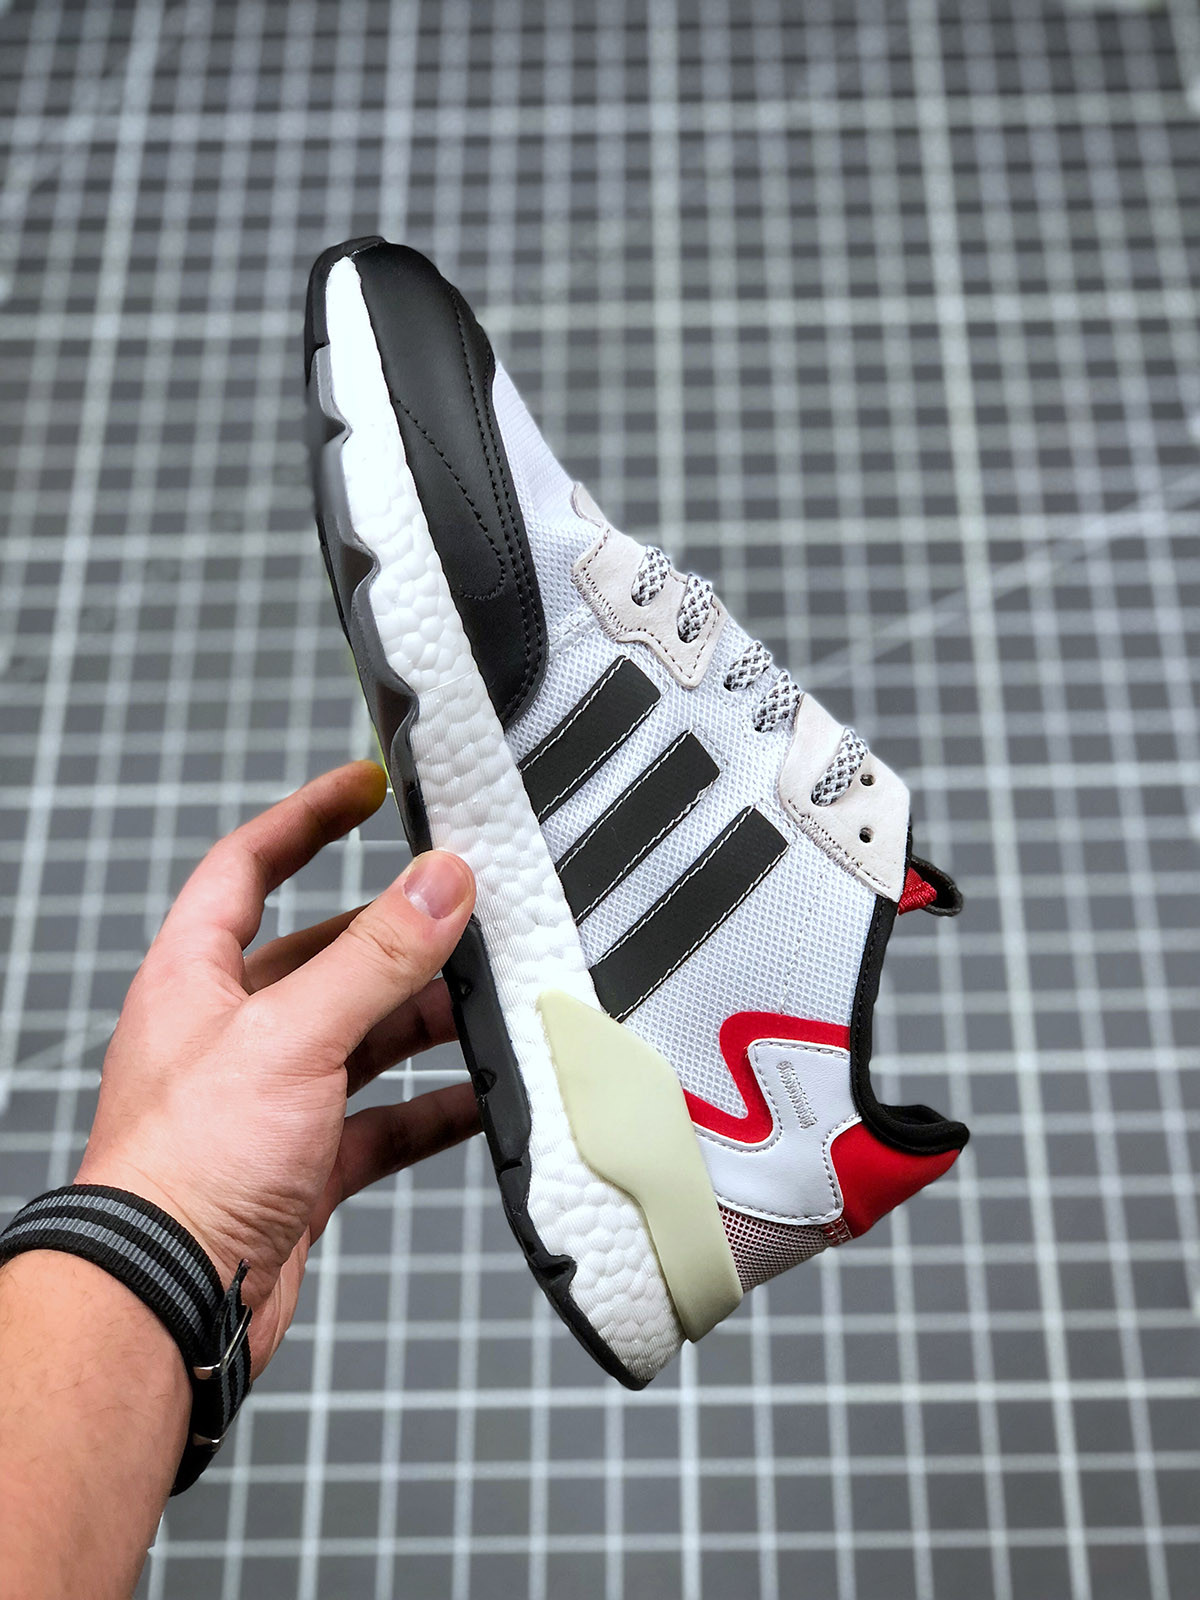 Adidas Nite Jogger Cloud White Core Black Hi-Res Red For Sale